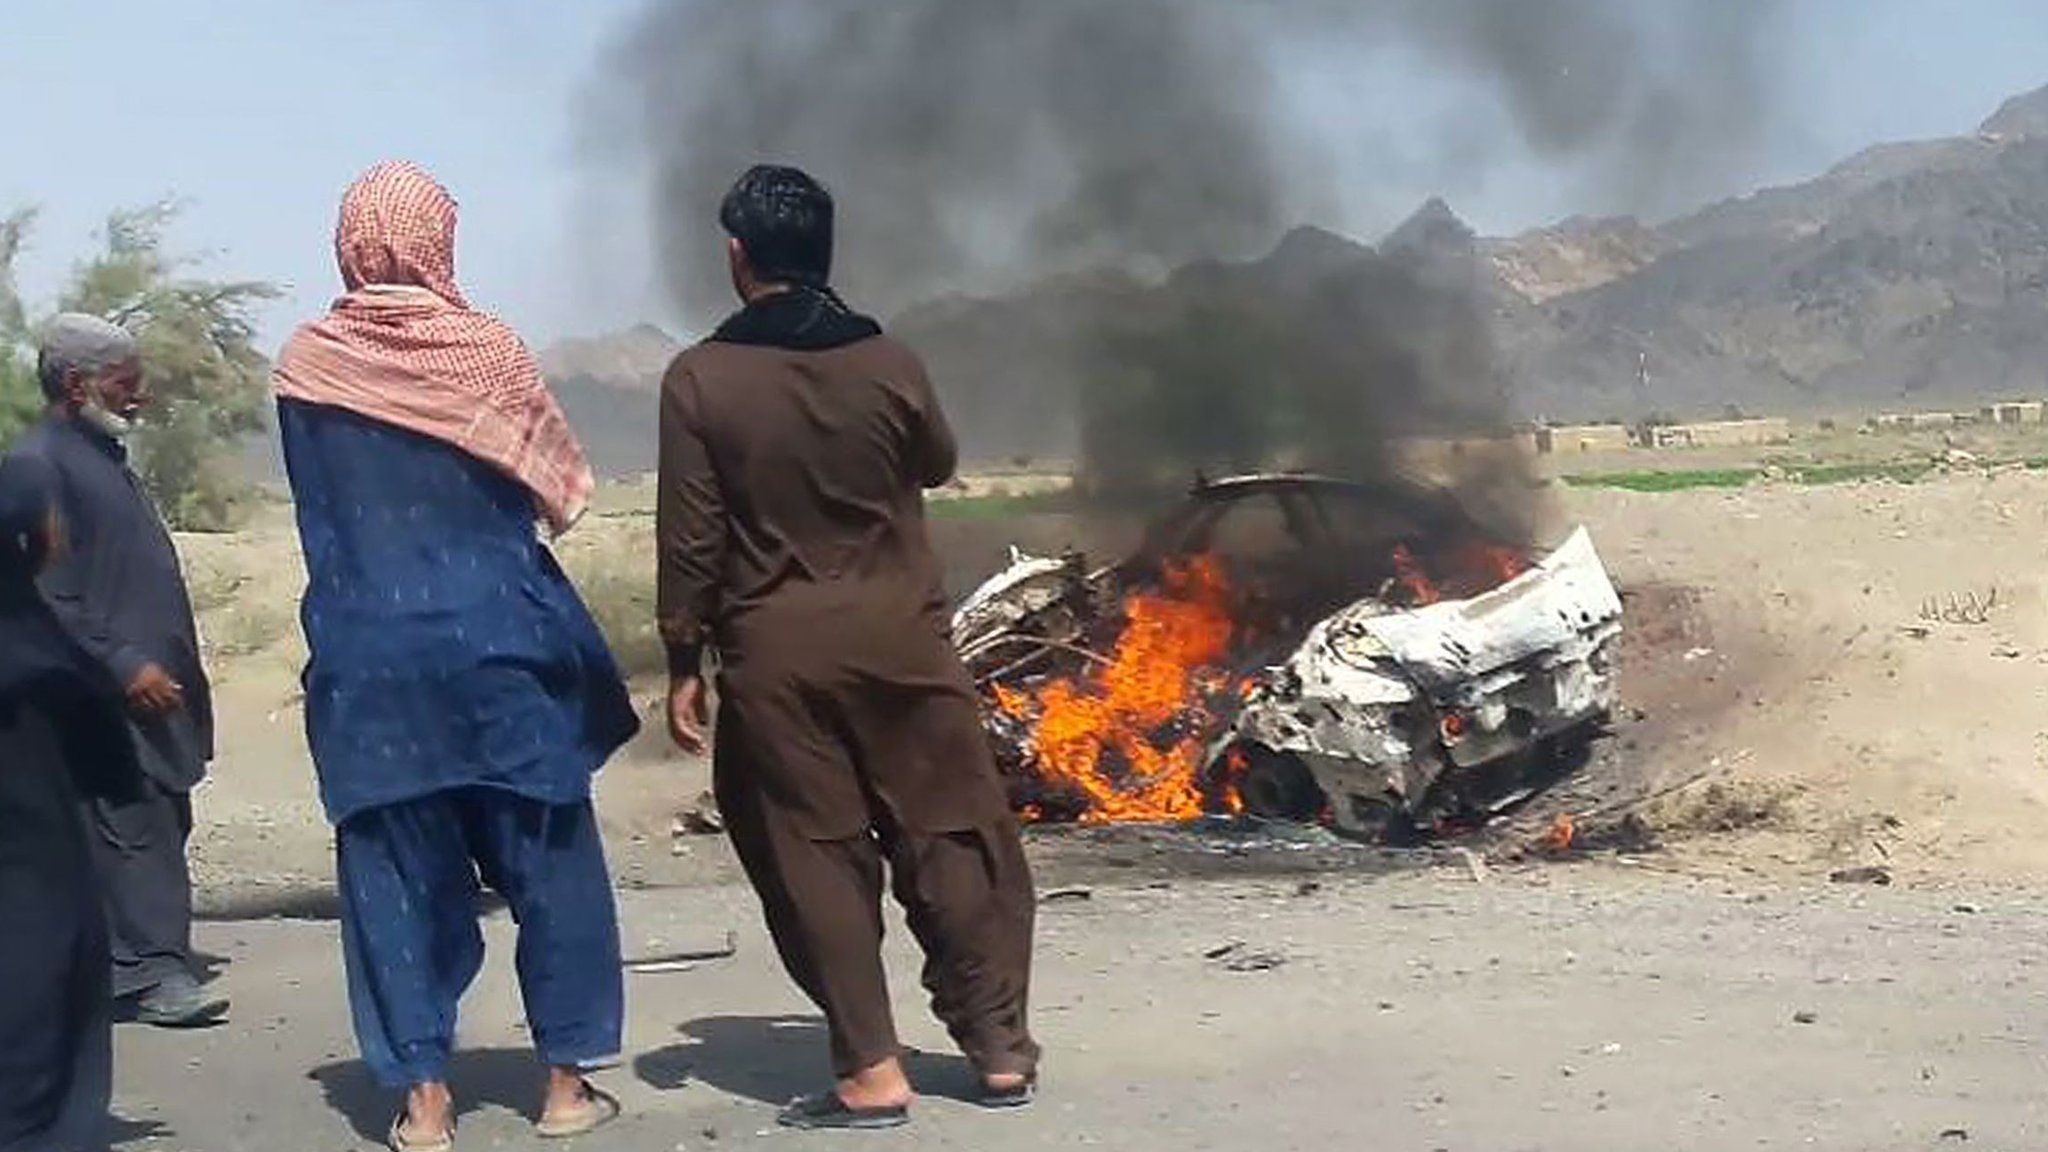 The purported site of the drone strike in the Ahmad Wal area of Balochistan in Pakistan, 21 May